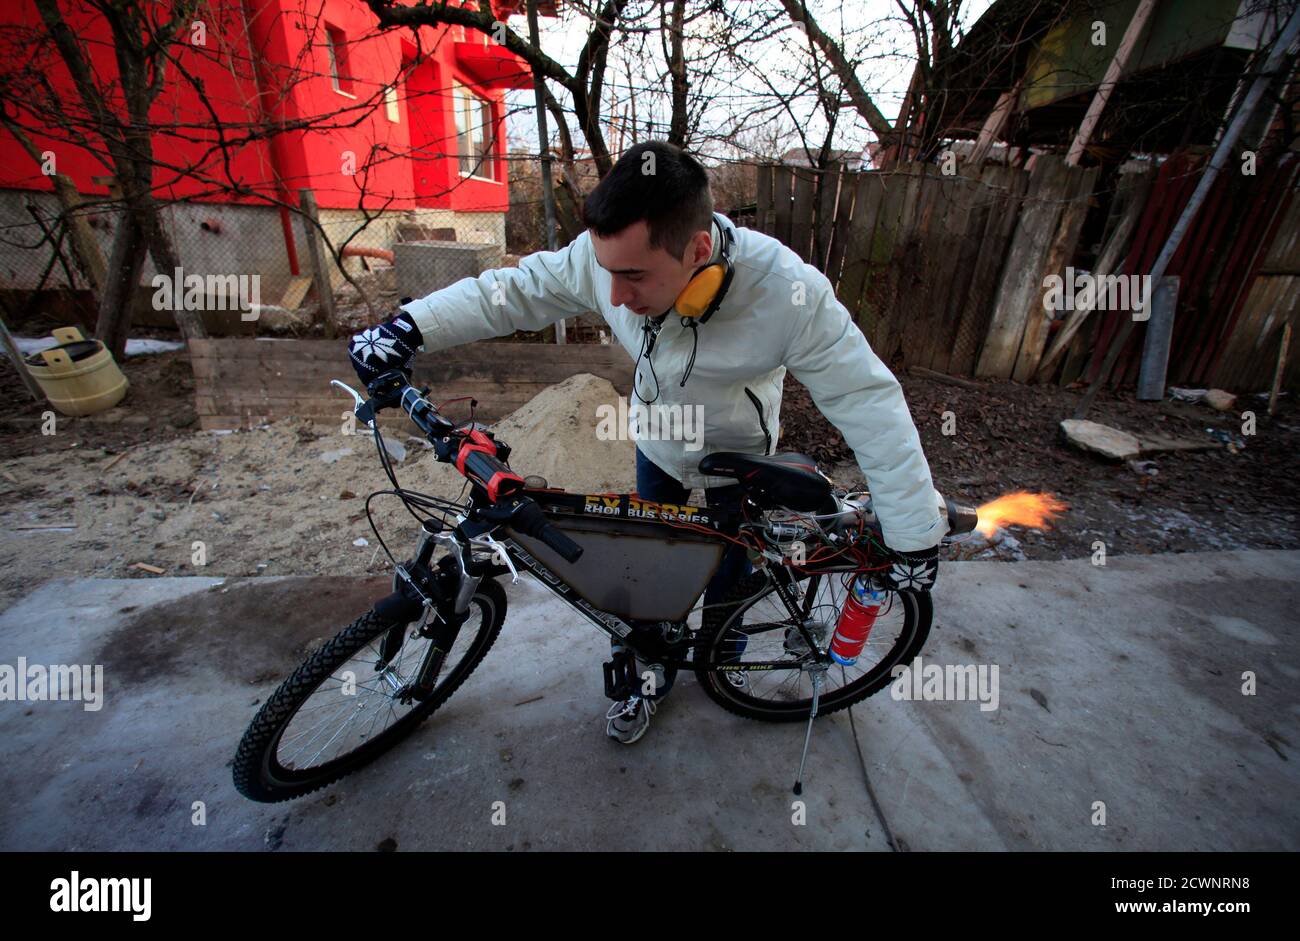 Raul Oaida starts his bicycle propelled with a self-built jet engine in the  yard of his house in Deva, 399 km (245 miles) of Bucharest January 12,  2013. Using his pocket money